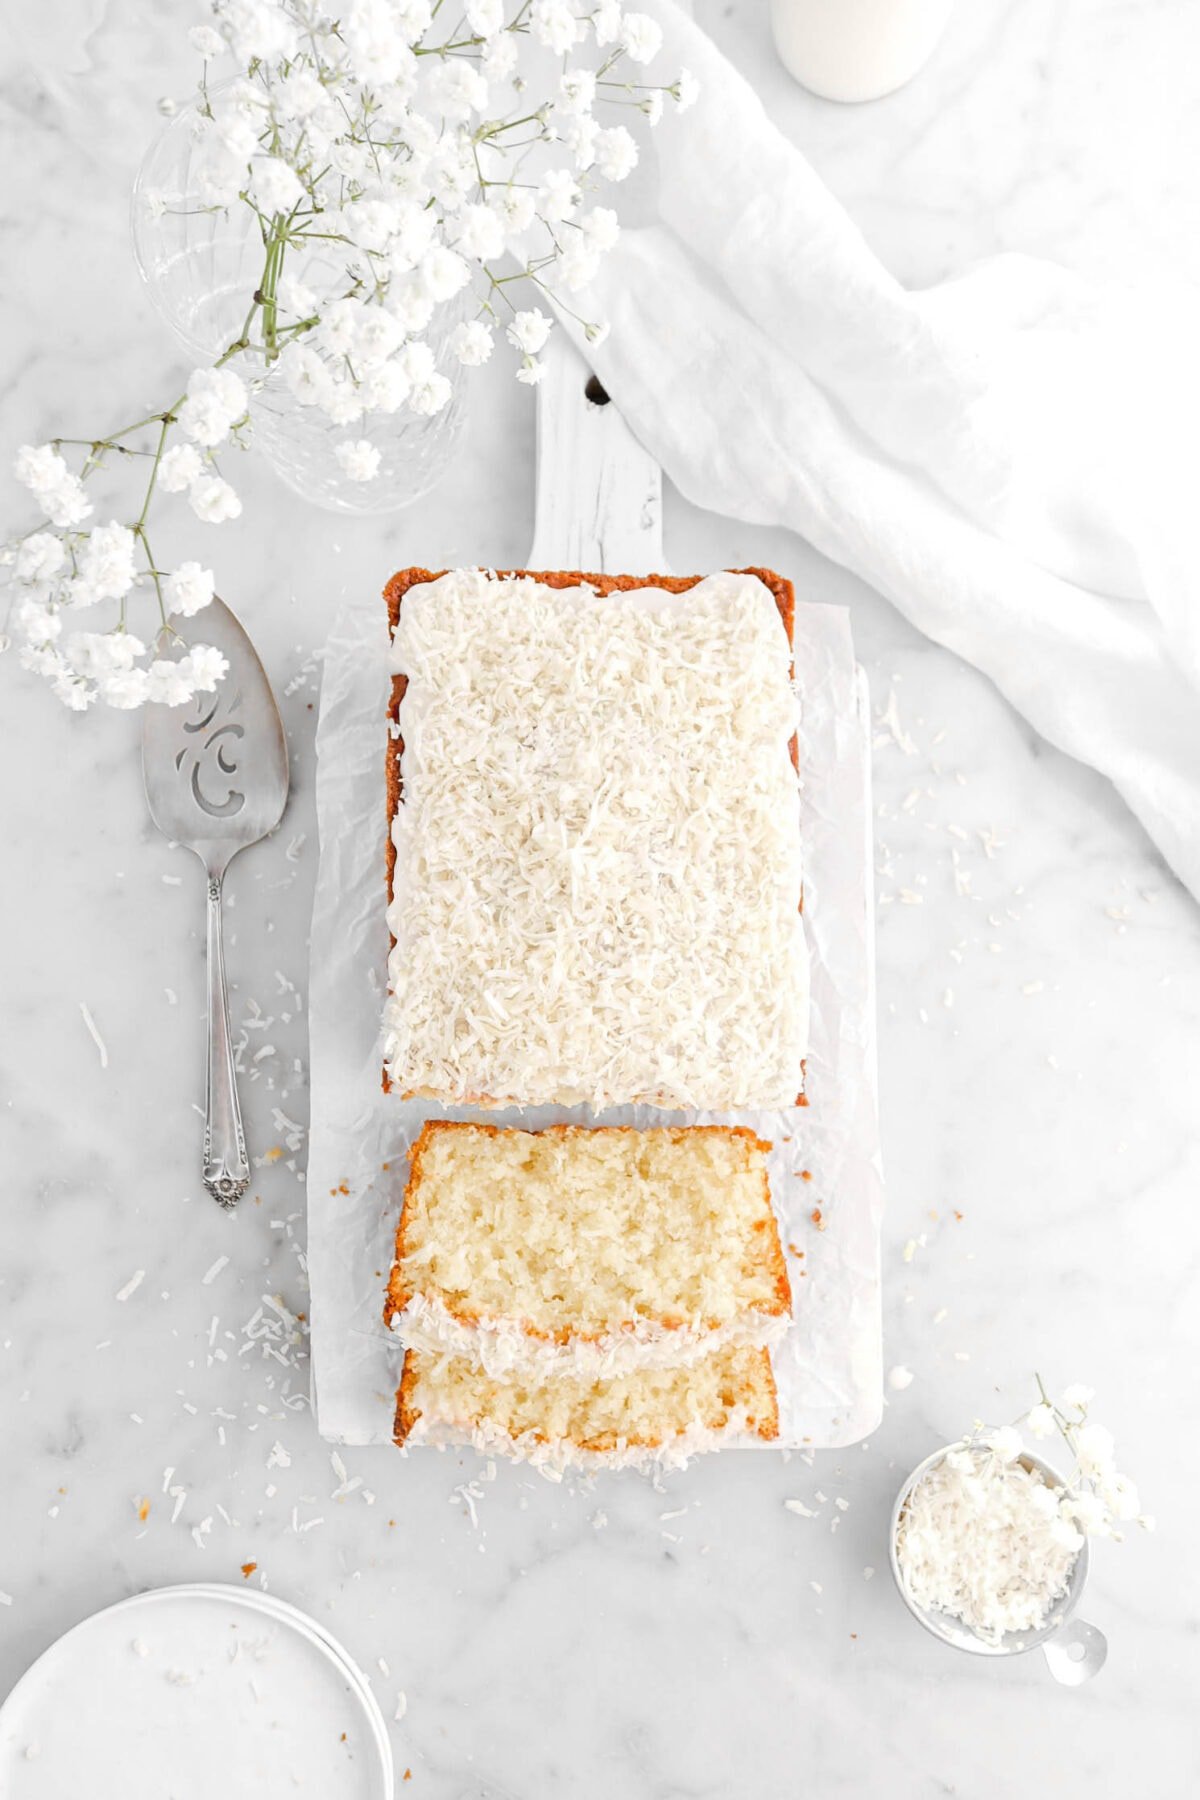 overhead shot of coconut pound cake with two slices laying in front with white flowers above, a cake knife and white napkin beside, and shredded coconut around.